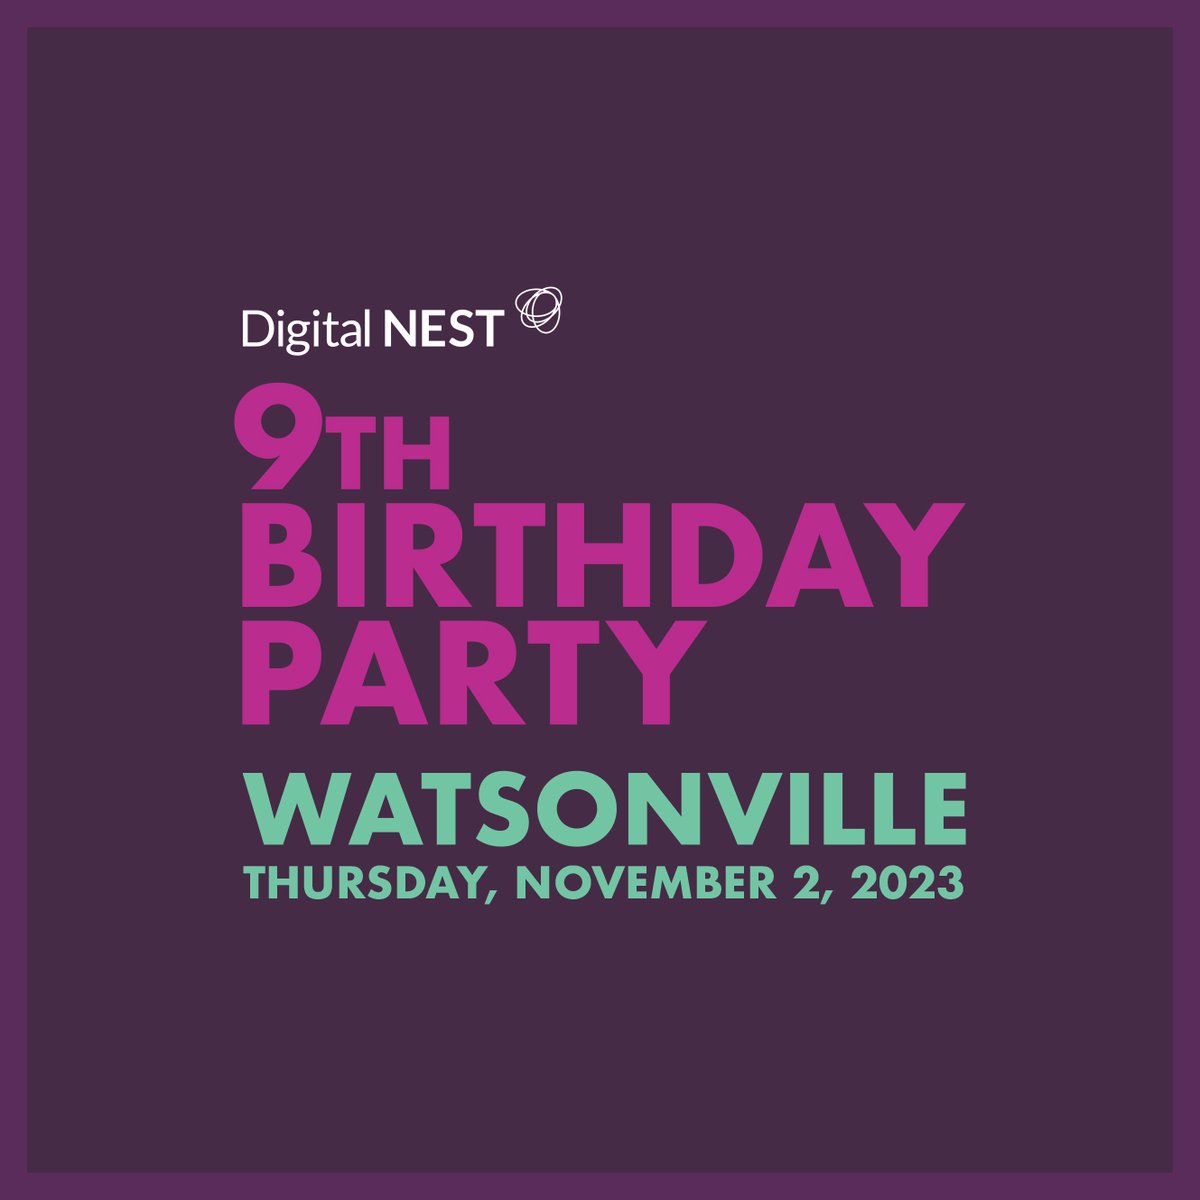 Today is the day, the first of four parties kicks off today at our Watsonville site, from 5pm to 7pm. Hope to see you there! . #Birthday #DigitalNEST #Cake #Watsonville #anniversary